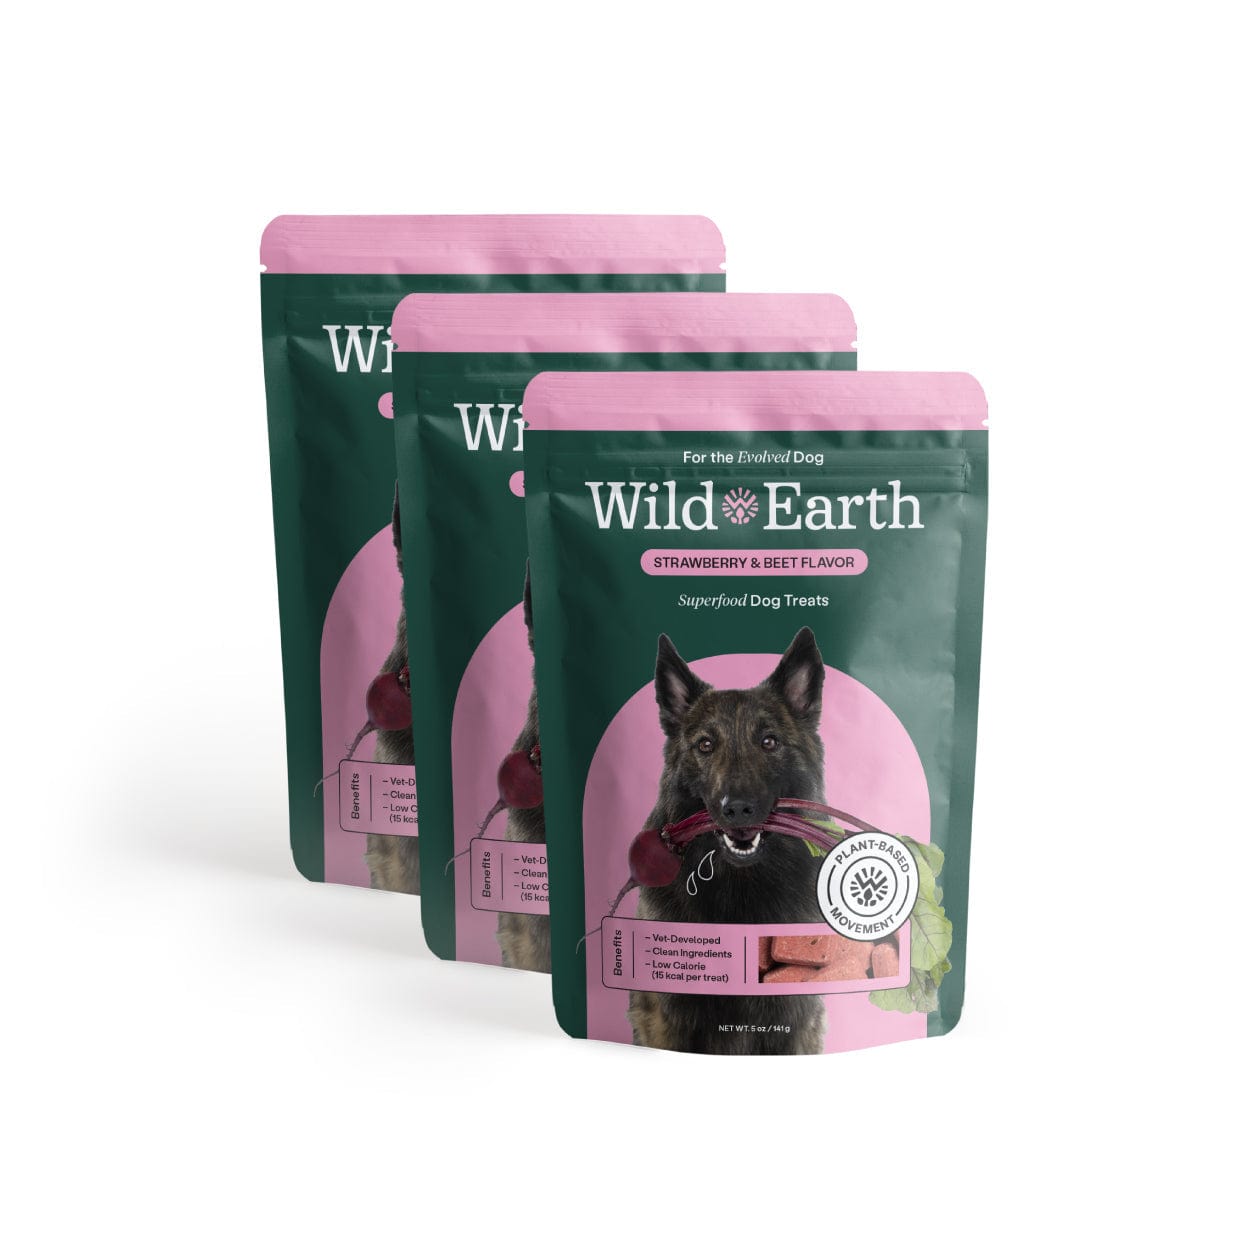 Wild Earth Strawberry & Beet 3 Pack - Superfood Dog Treats with Koji (5 oz per bag) by Wild Earth Lay Lo Pets